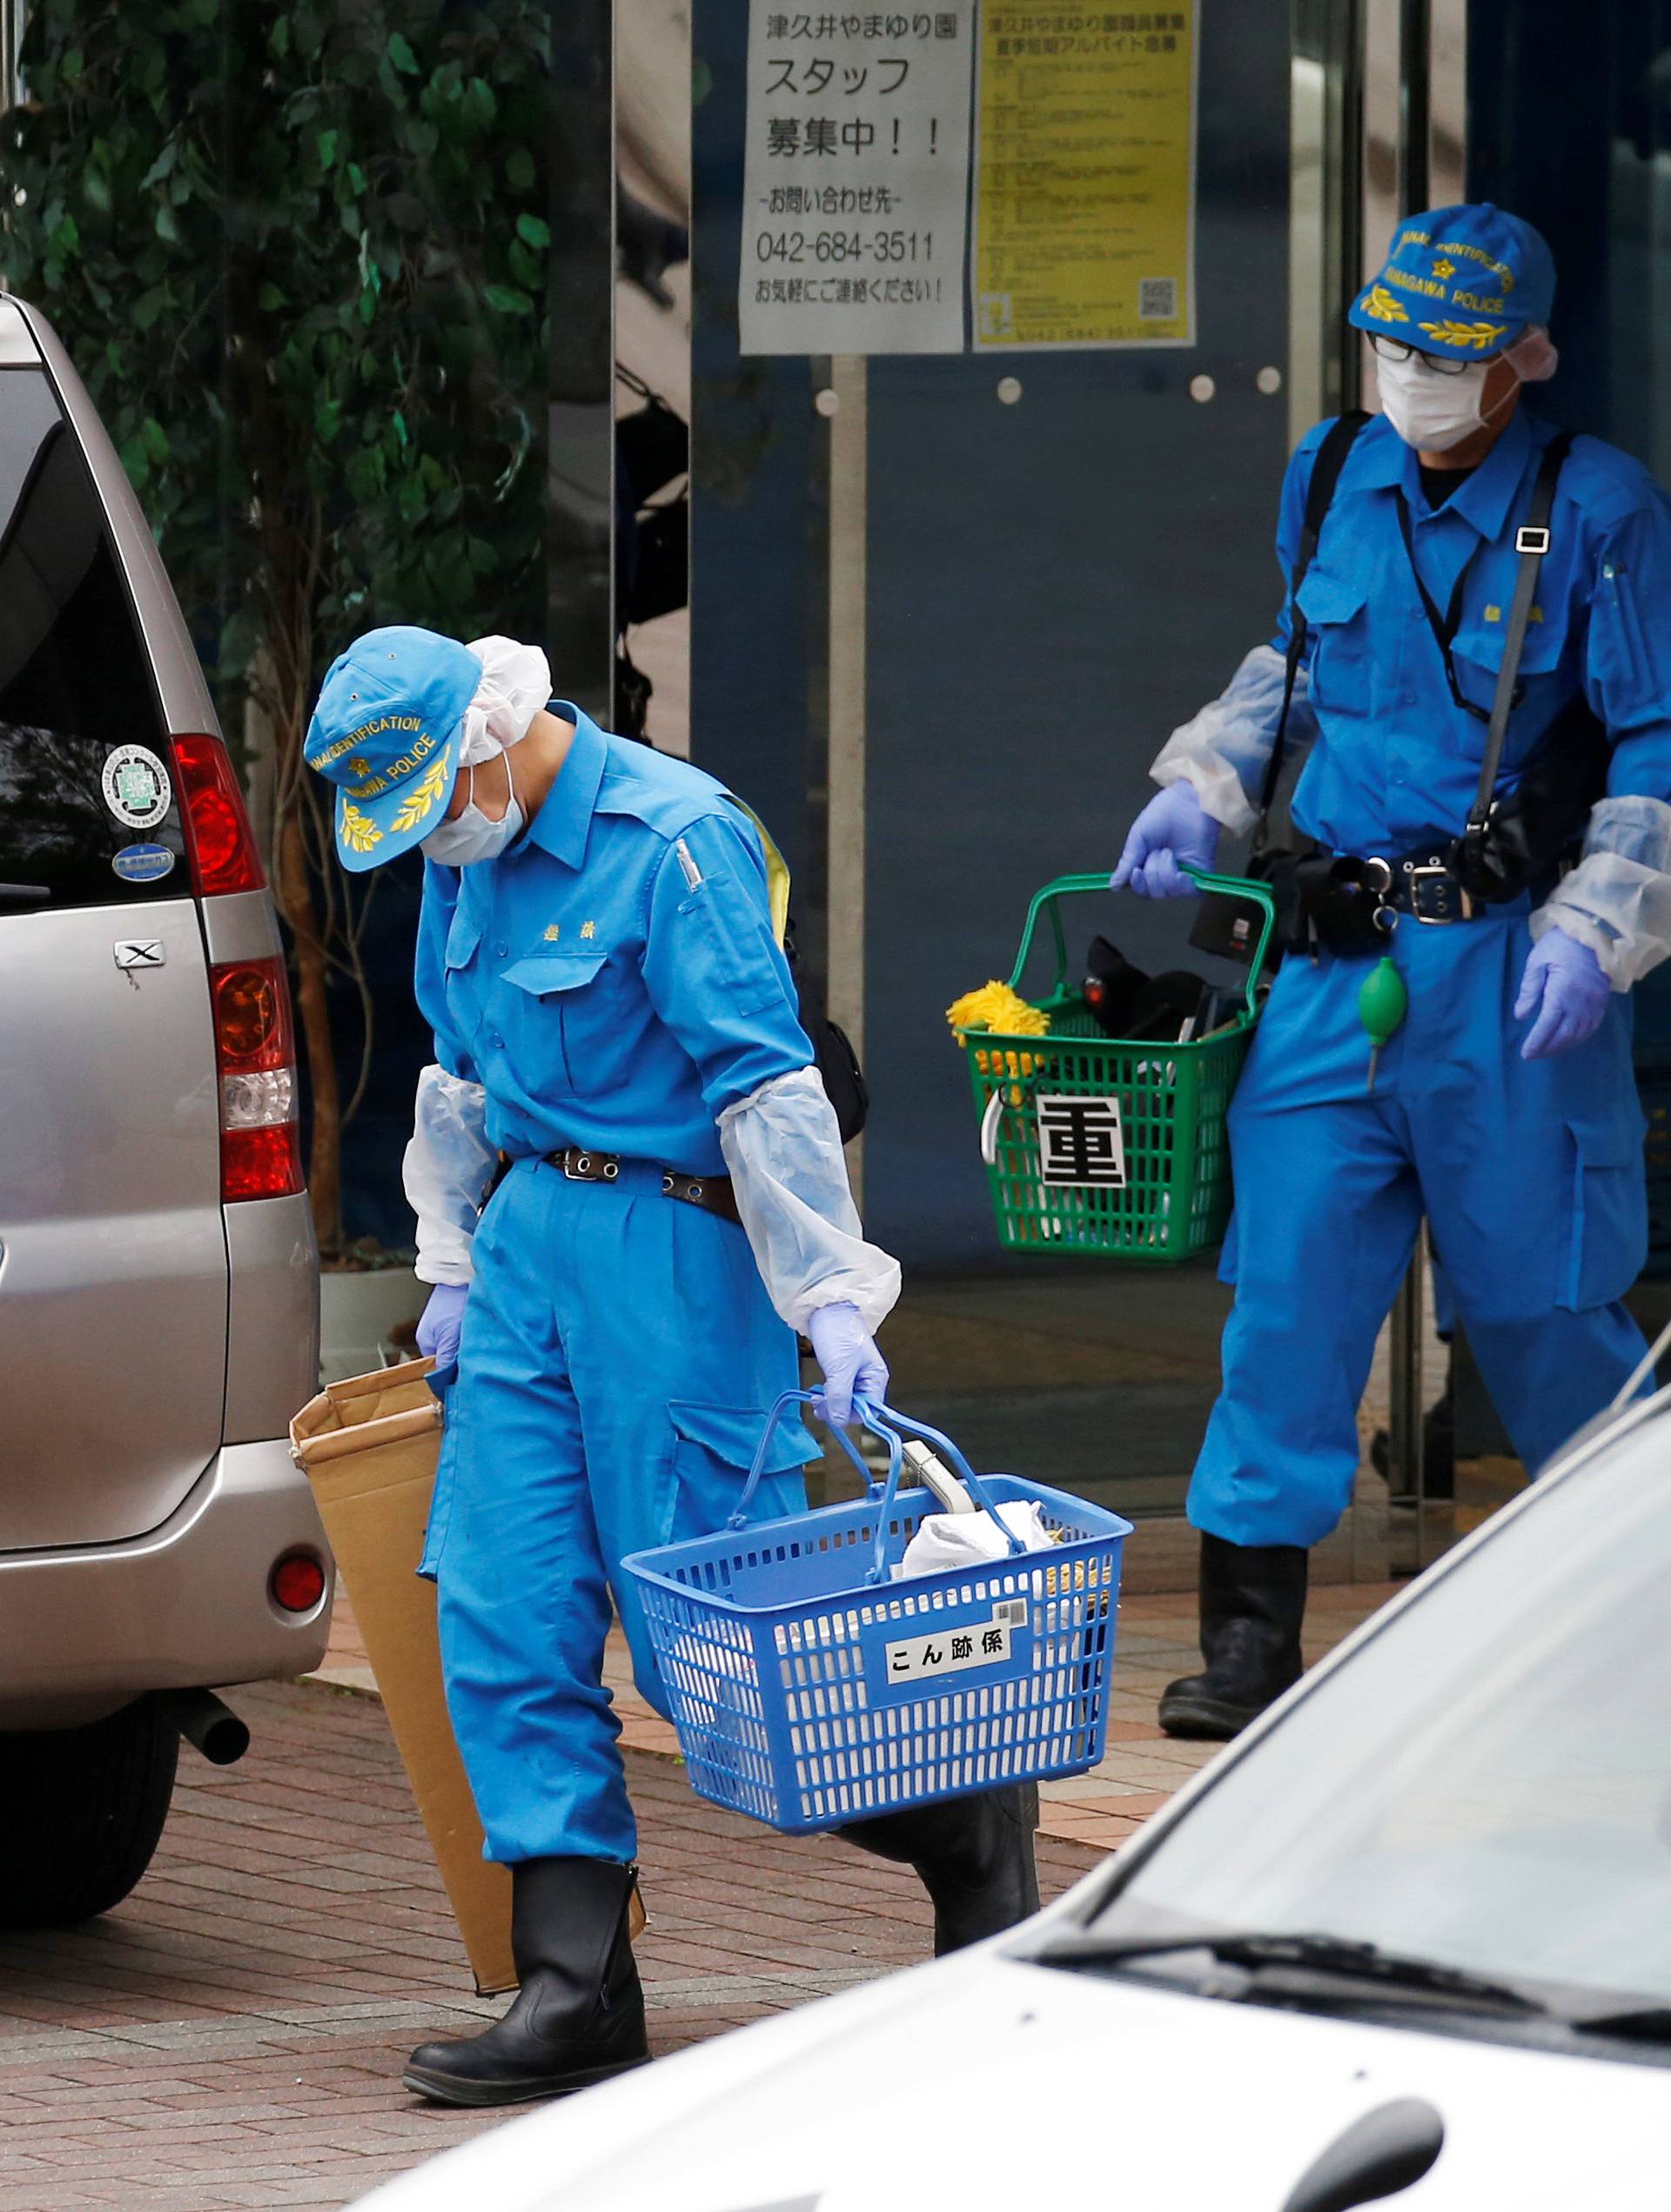 Police officers investigate at a facility for the disabled, where a deadly attack by a knife-wielding man took place, in Sagamihara, Kanagawa prefecture, Japan